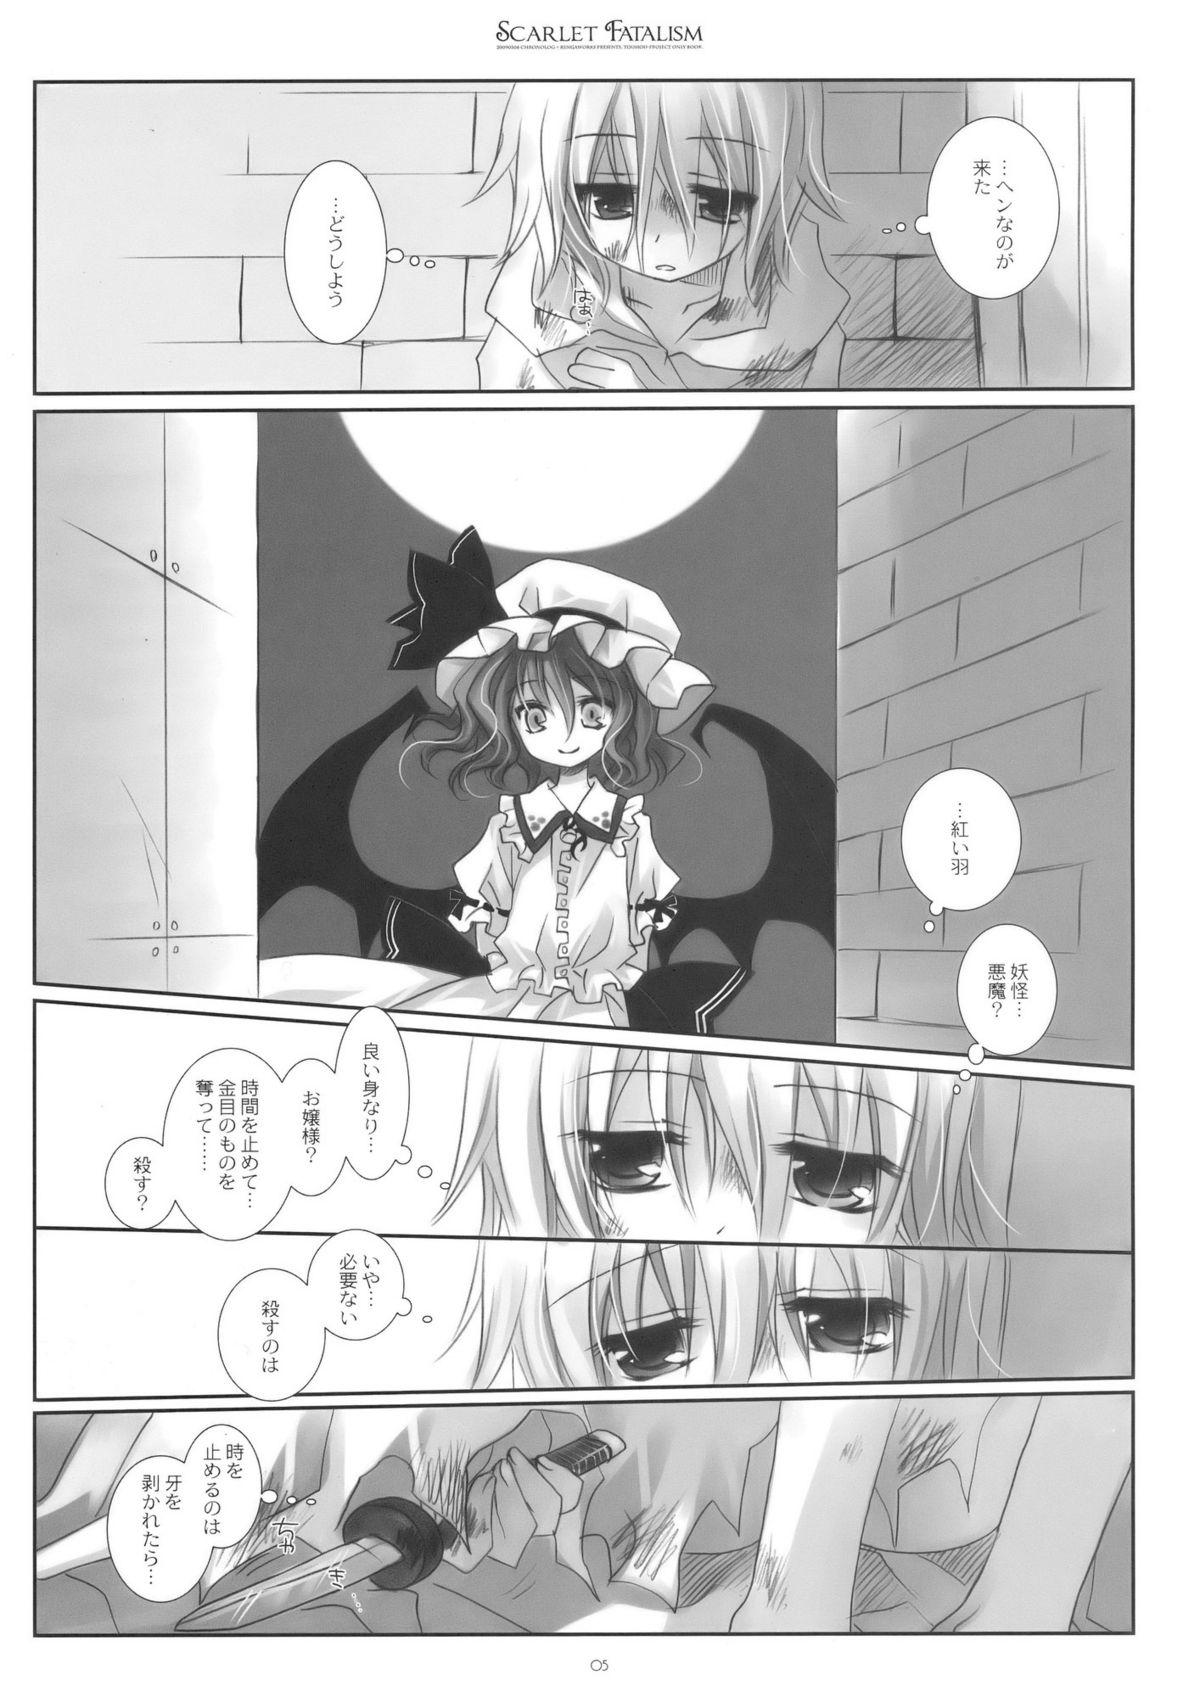 Solo Girl Scarlet Fatalism - Touhou project Follada - Page 5